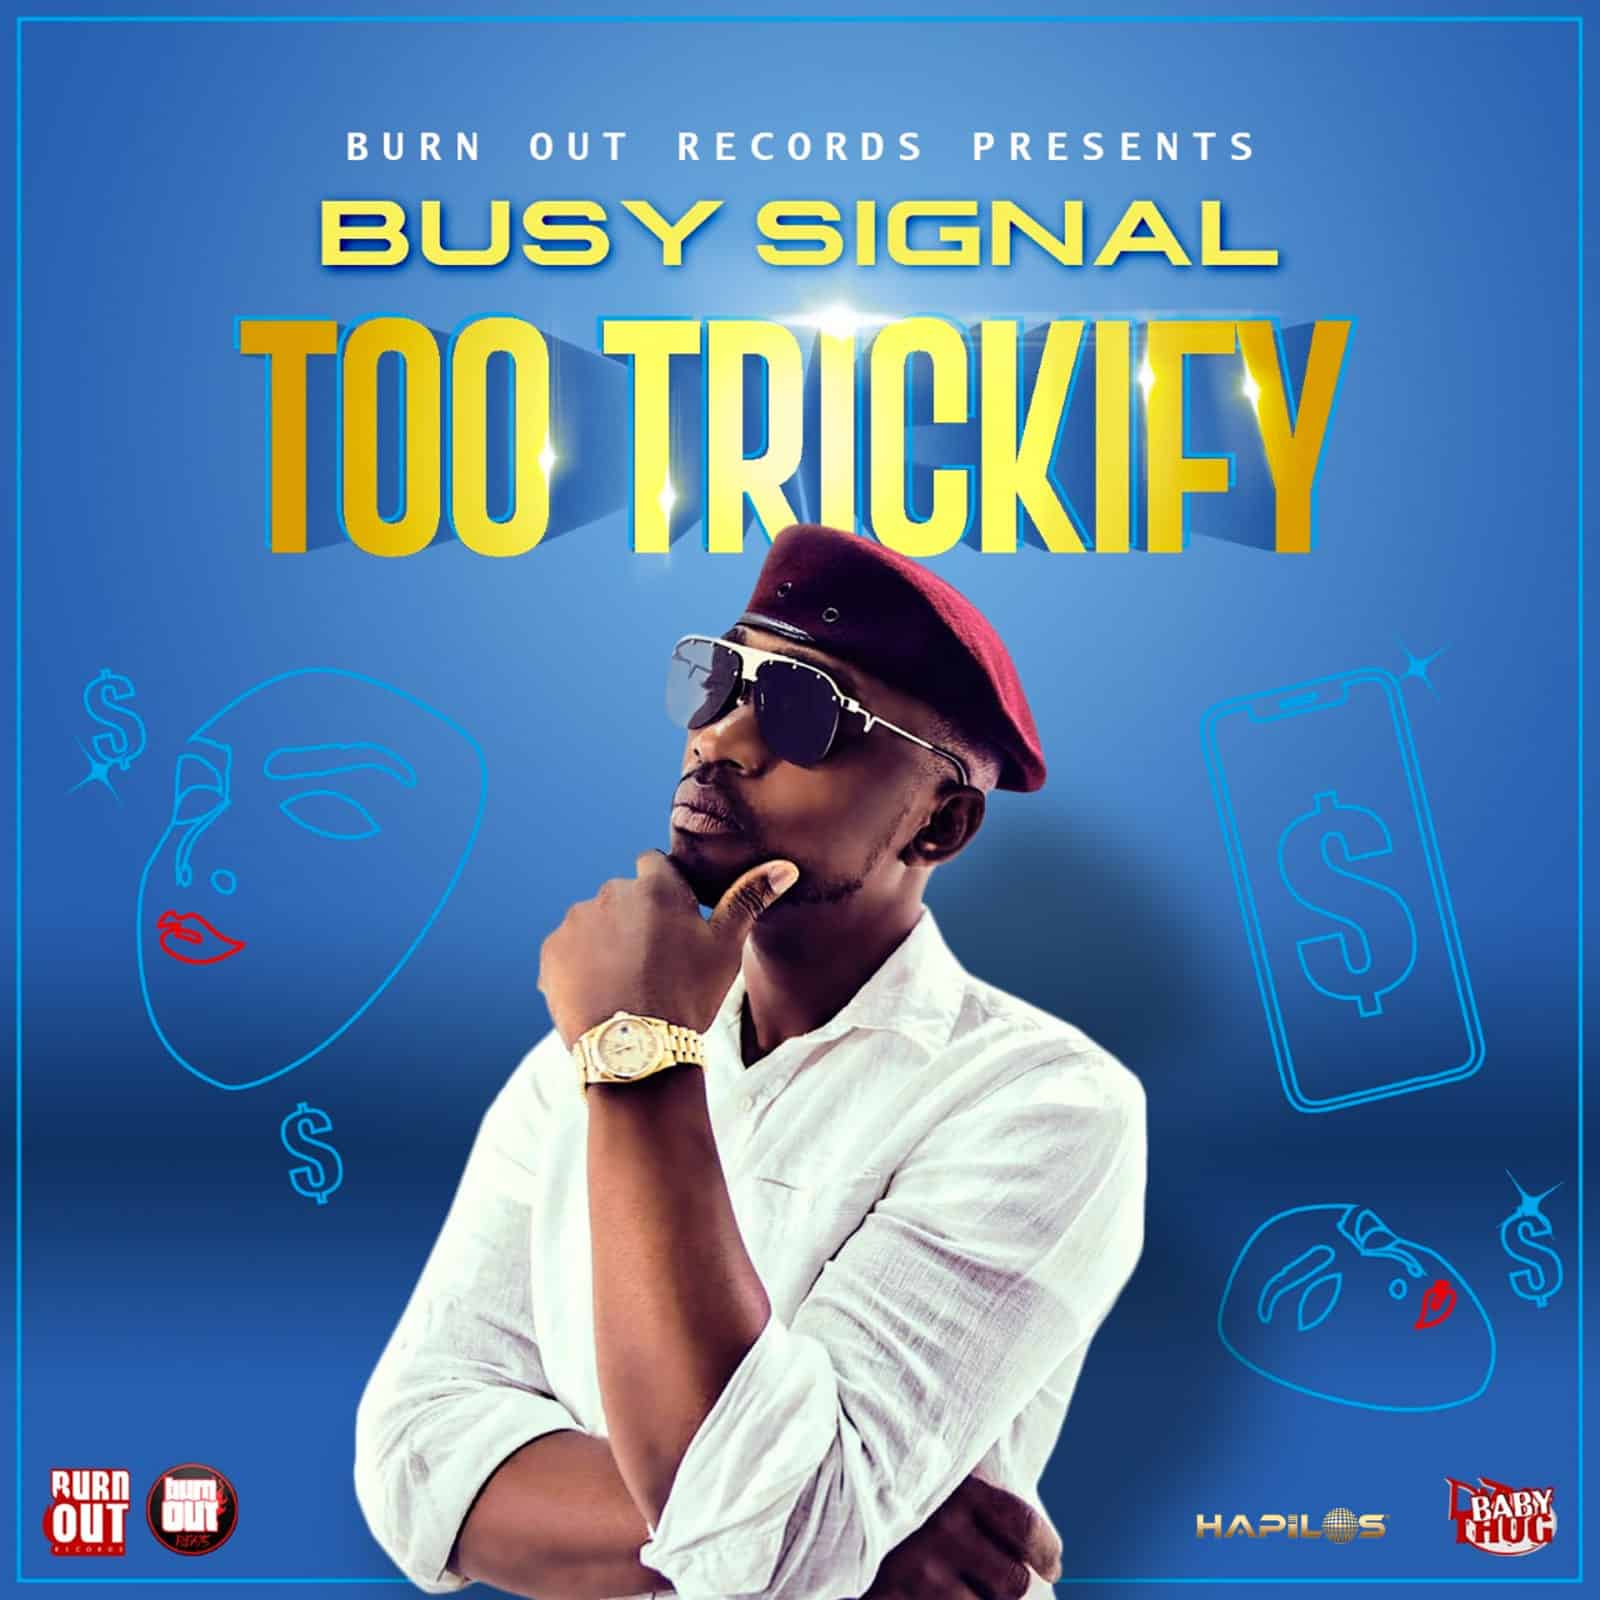 Busy Signal - Too Trickify - Burn Out Records